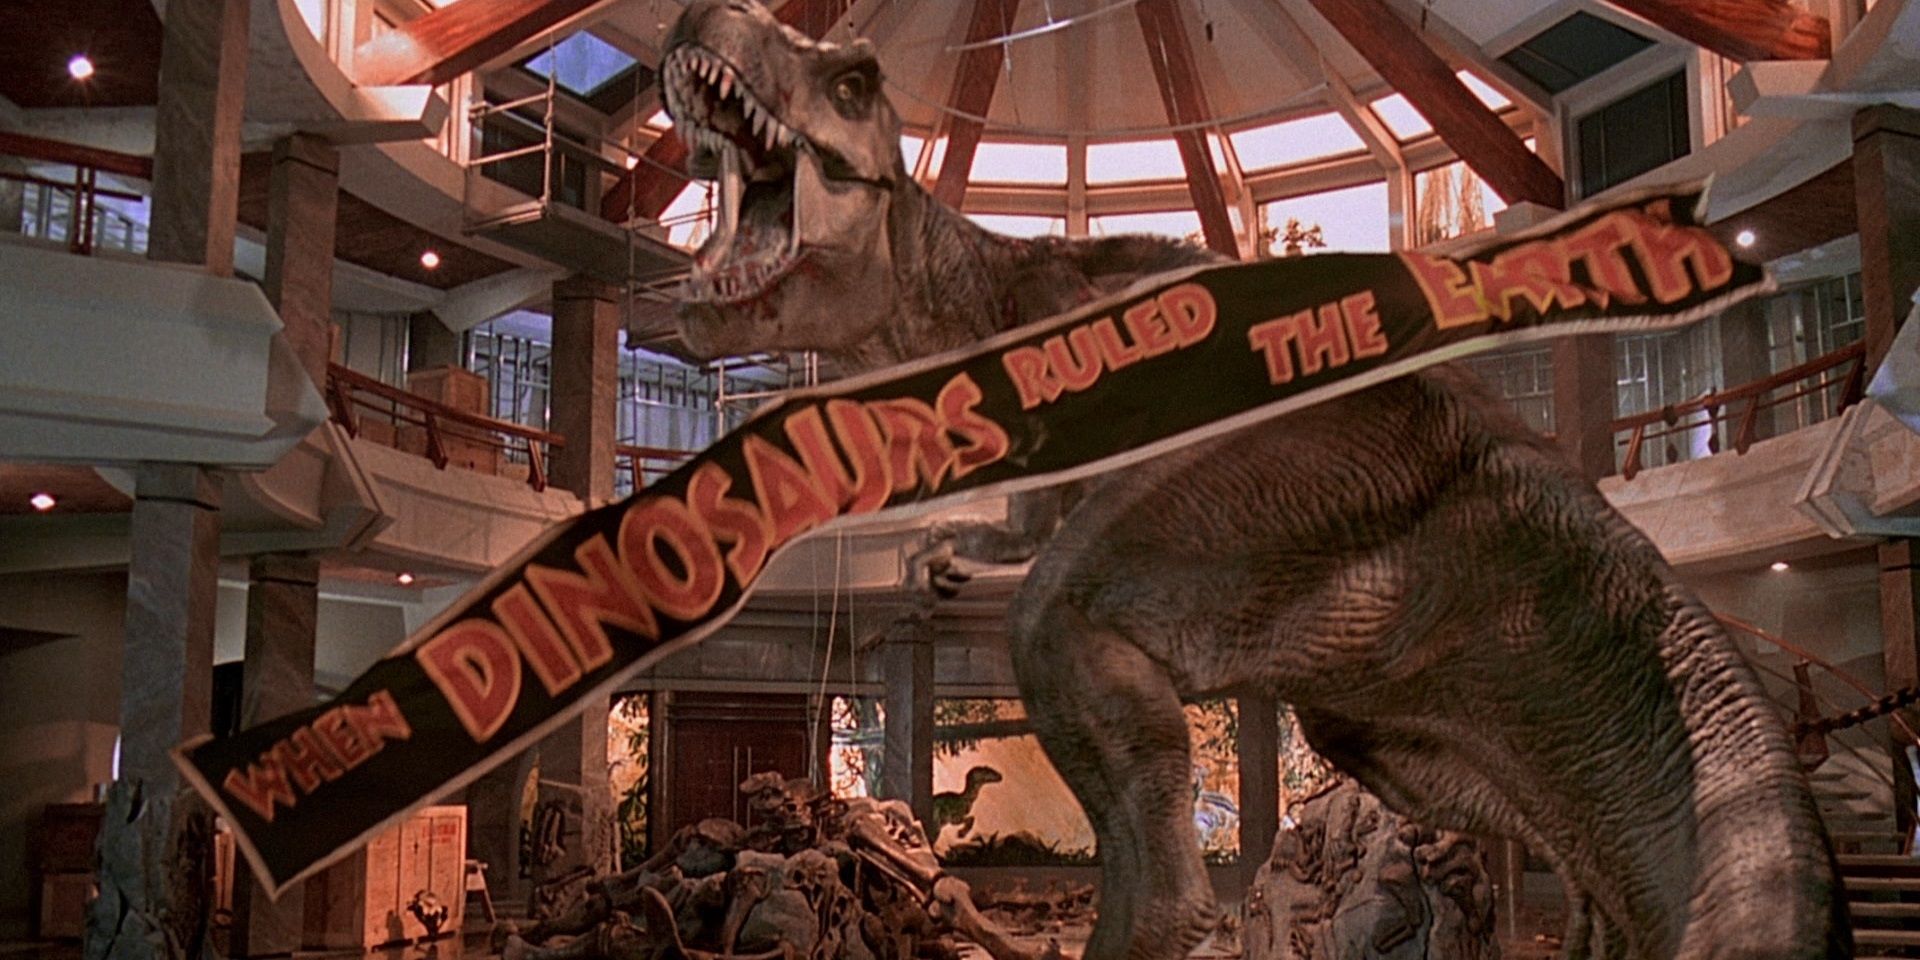 The T. rex roaring in the climax scene of Jurassic Park